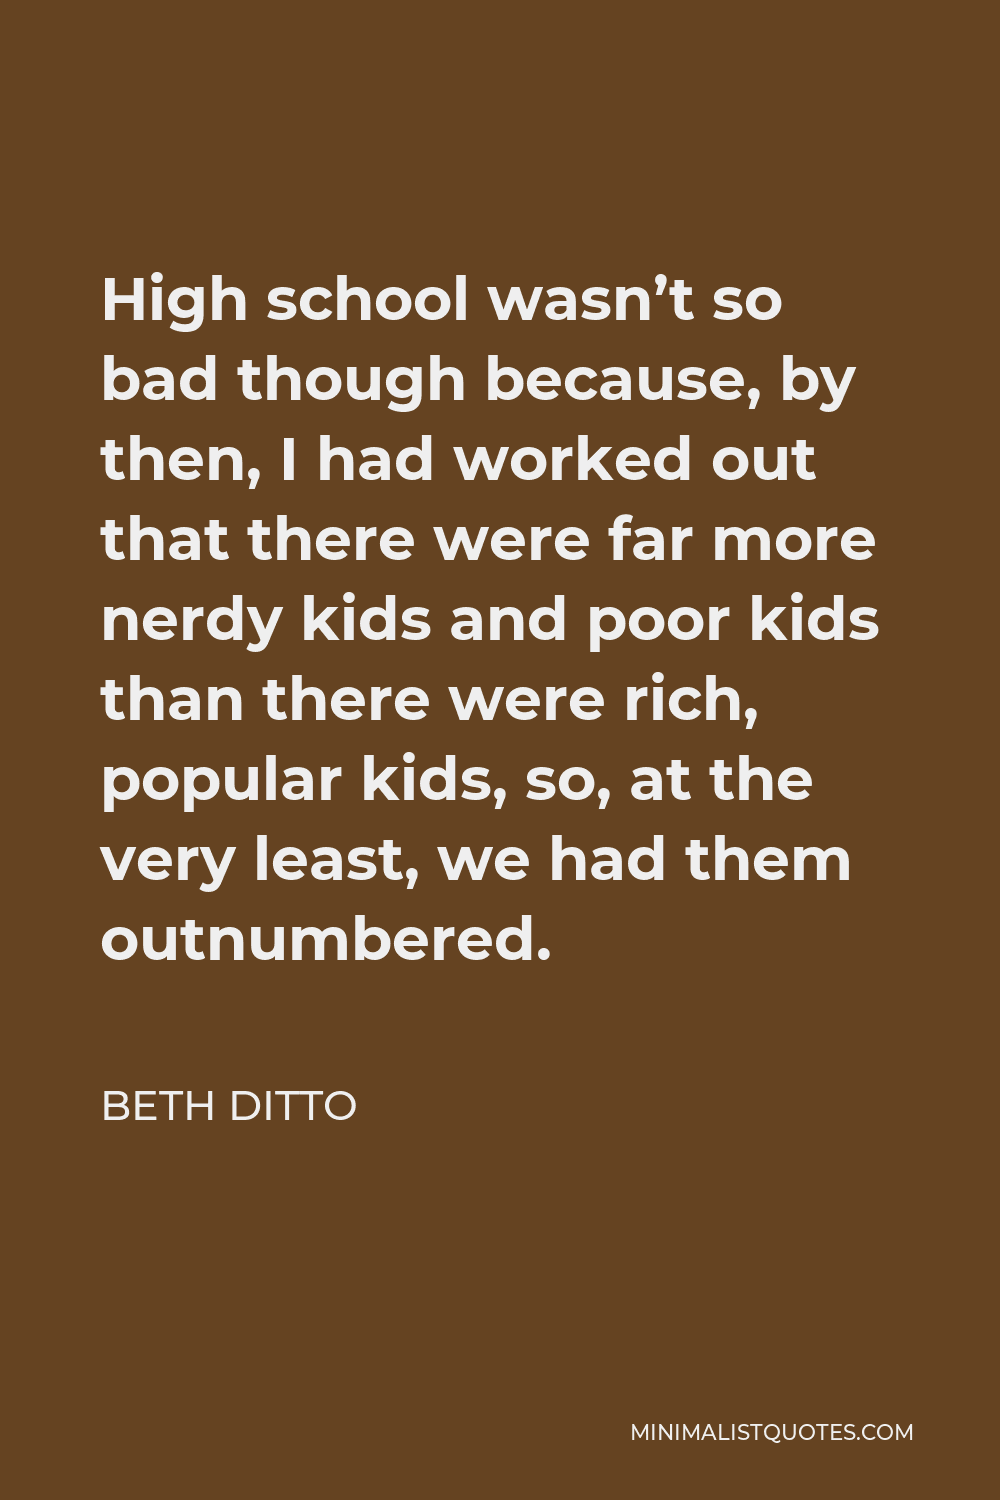 Beth Ditto quote: You know how people love to glamorize poverty